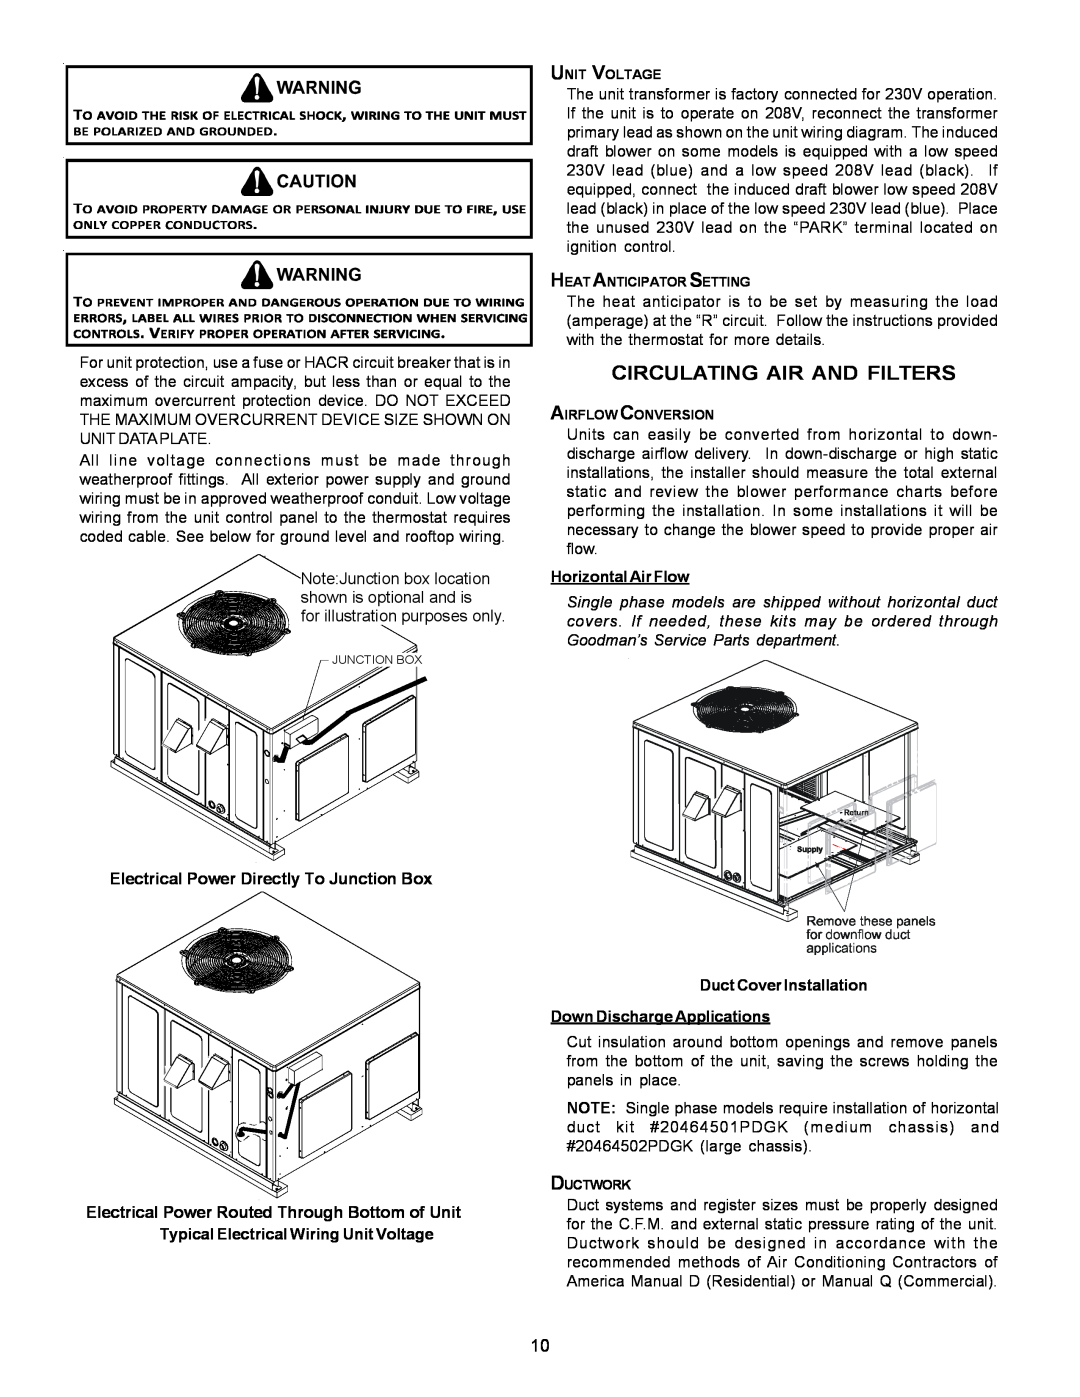 Goodman Mfg PG 15 specifications Electrical Power Directly To Junction Box, Electrical Power Routed Through Bottom of Unit 